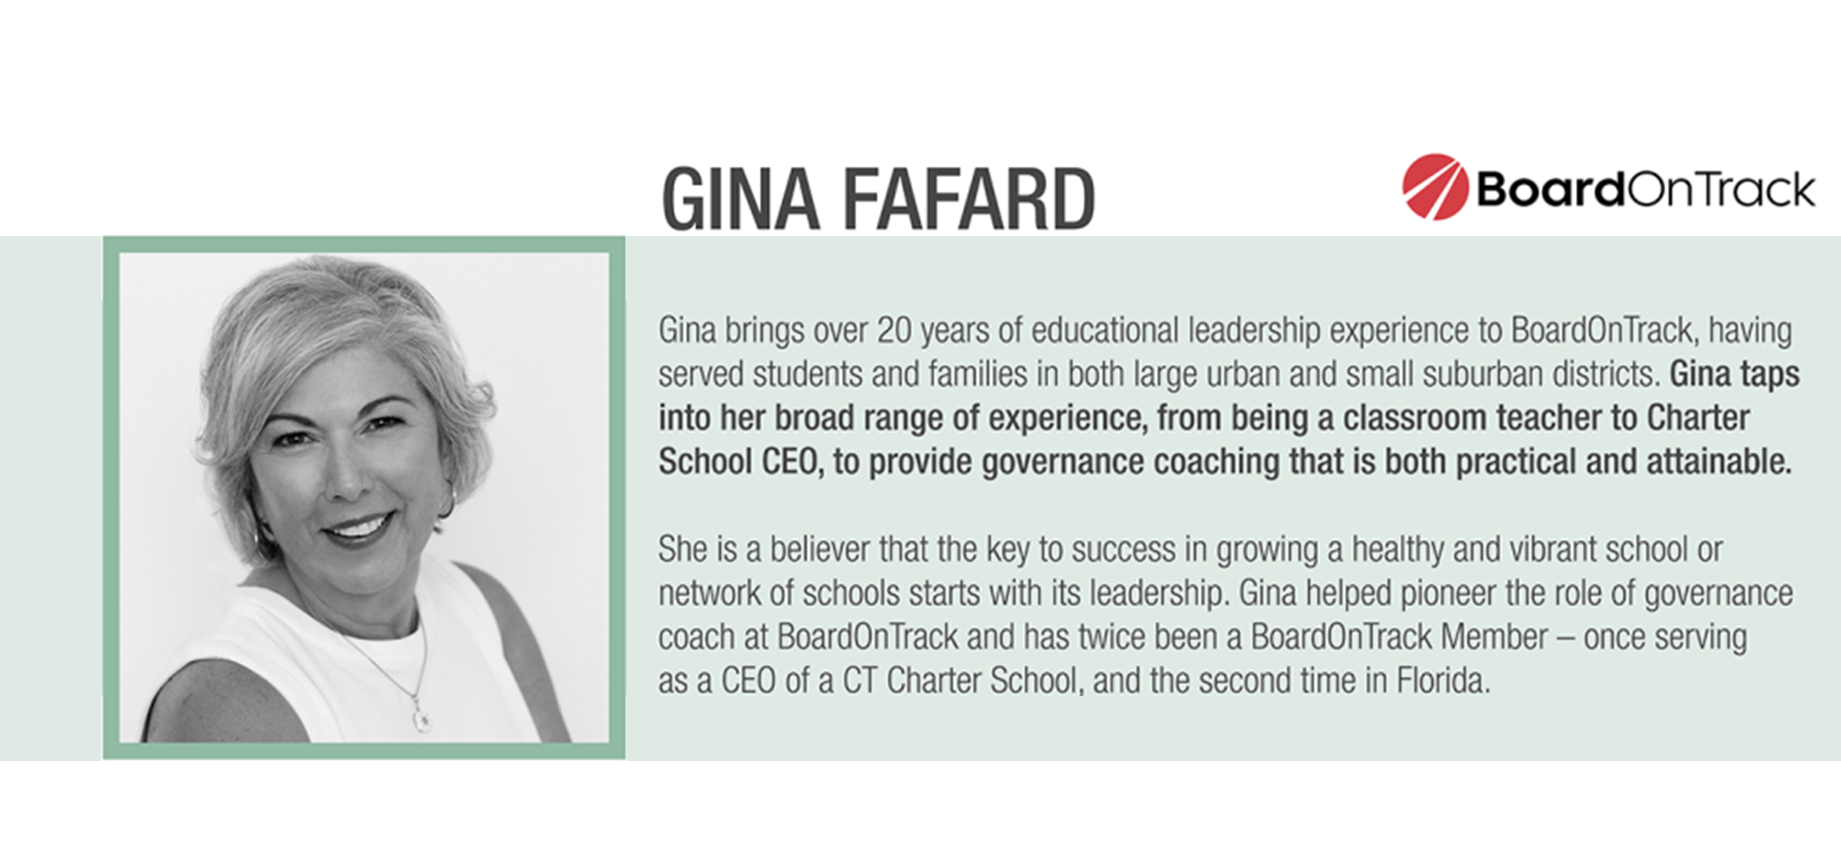 Fundraising Learning Series: Q&A with Gina Fafard, BoardOnTrack